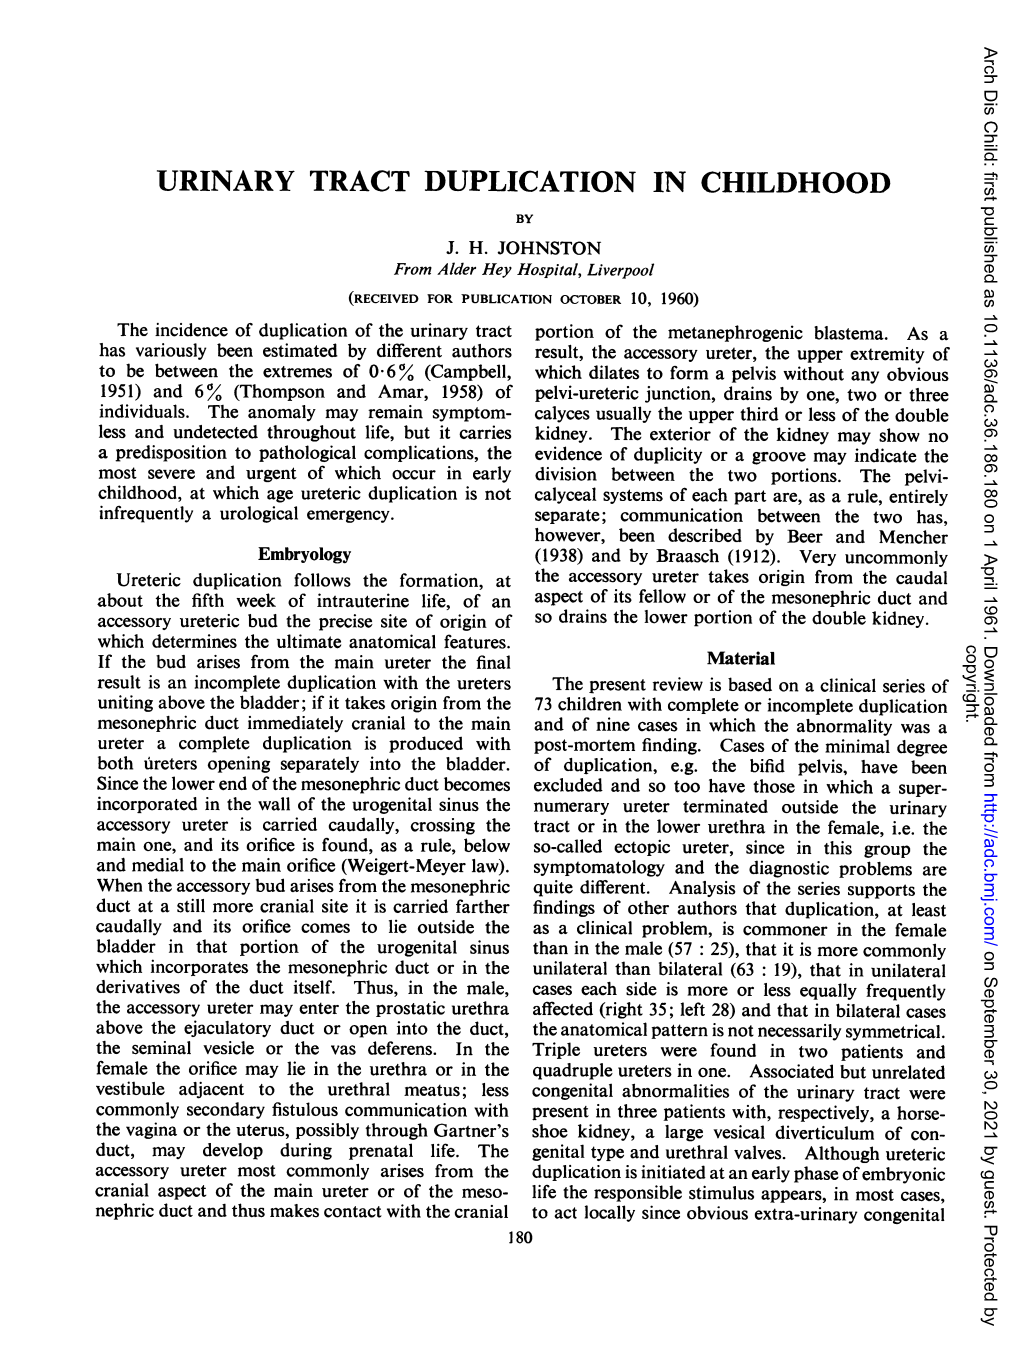 Urinary Tract Duplication in Childhood by J